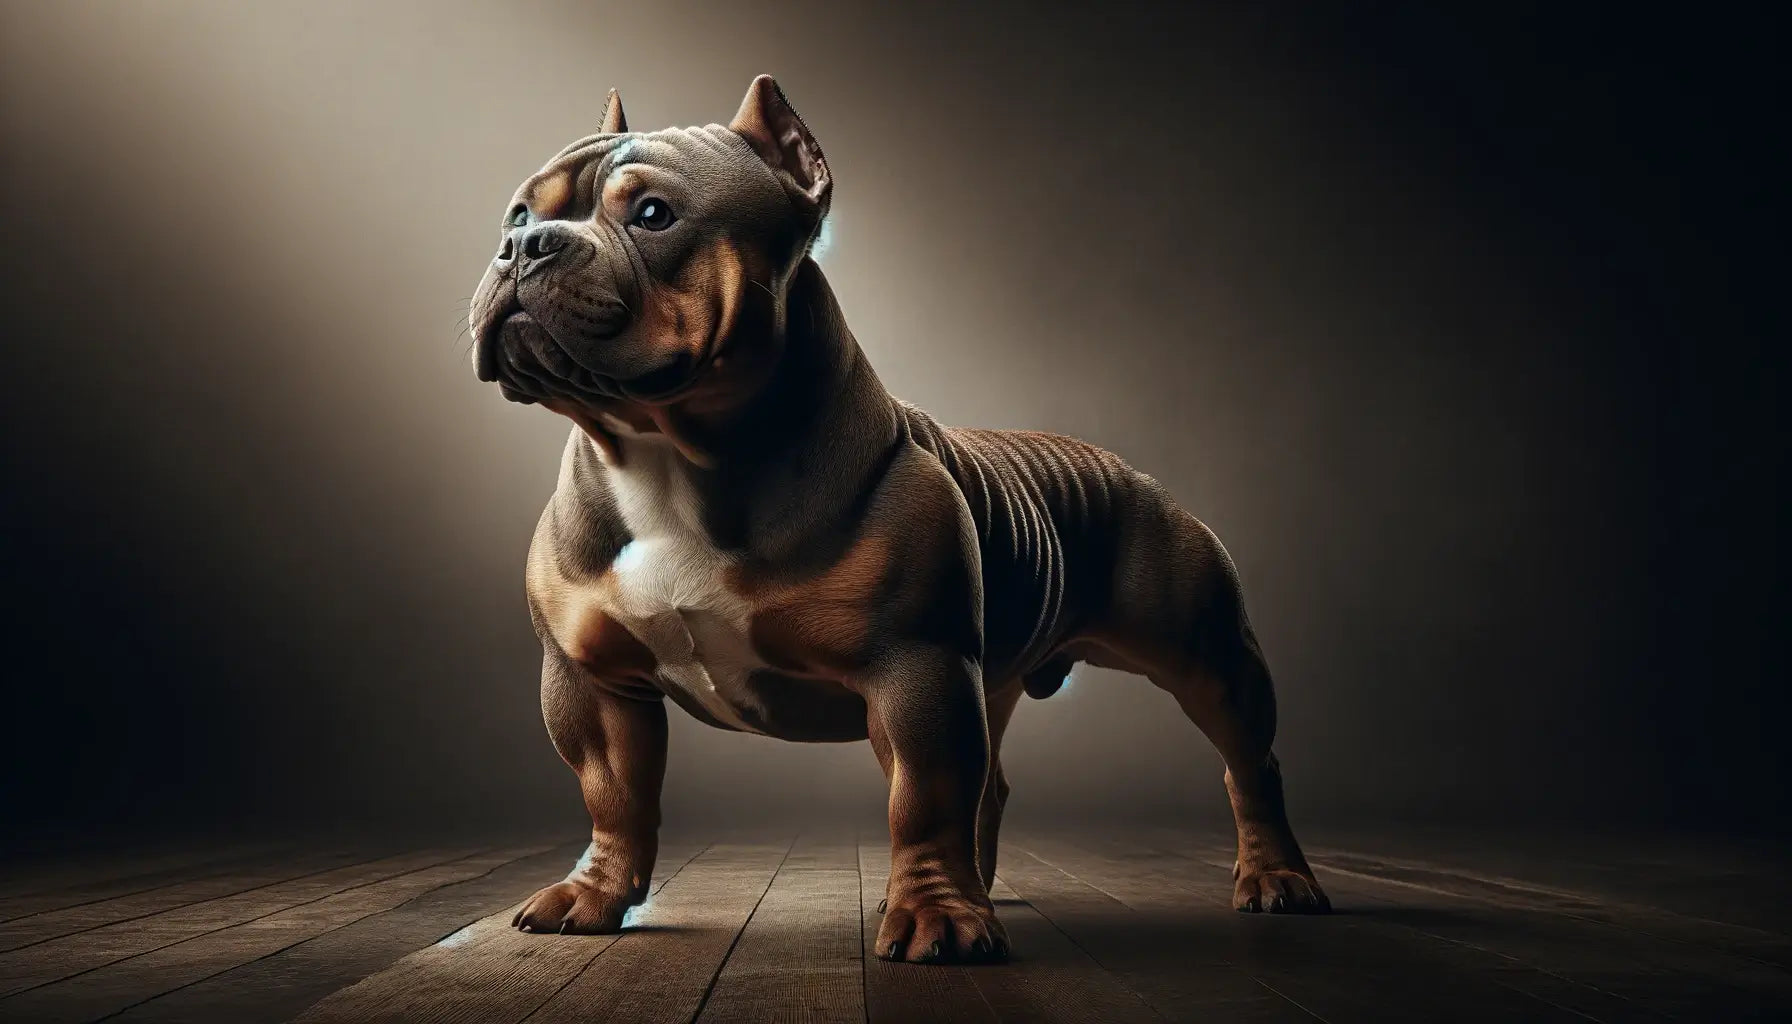 A Pocket Bully in a stance that showcases its muscular physique and compact build, ideal for breed enthusiasts